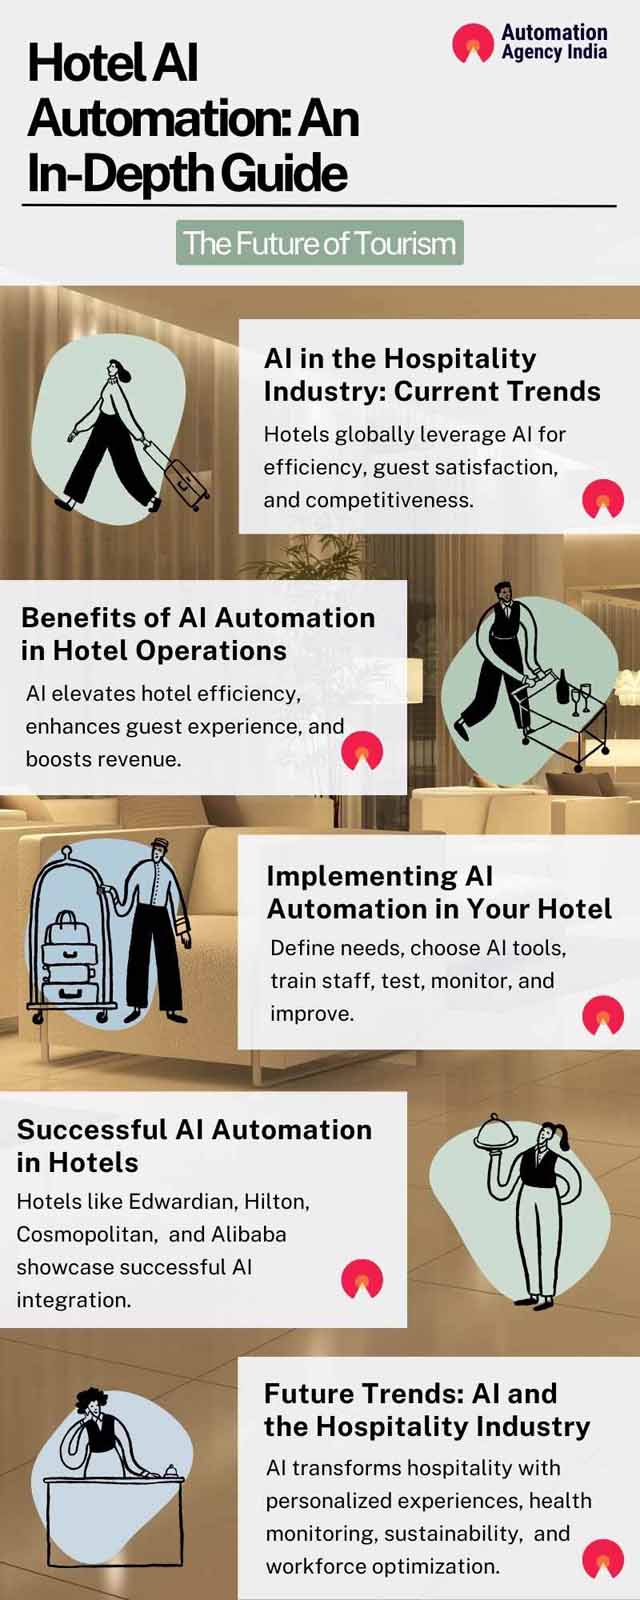 Infographic on AI Automation of Hotels: An In-Depth Guide